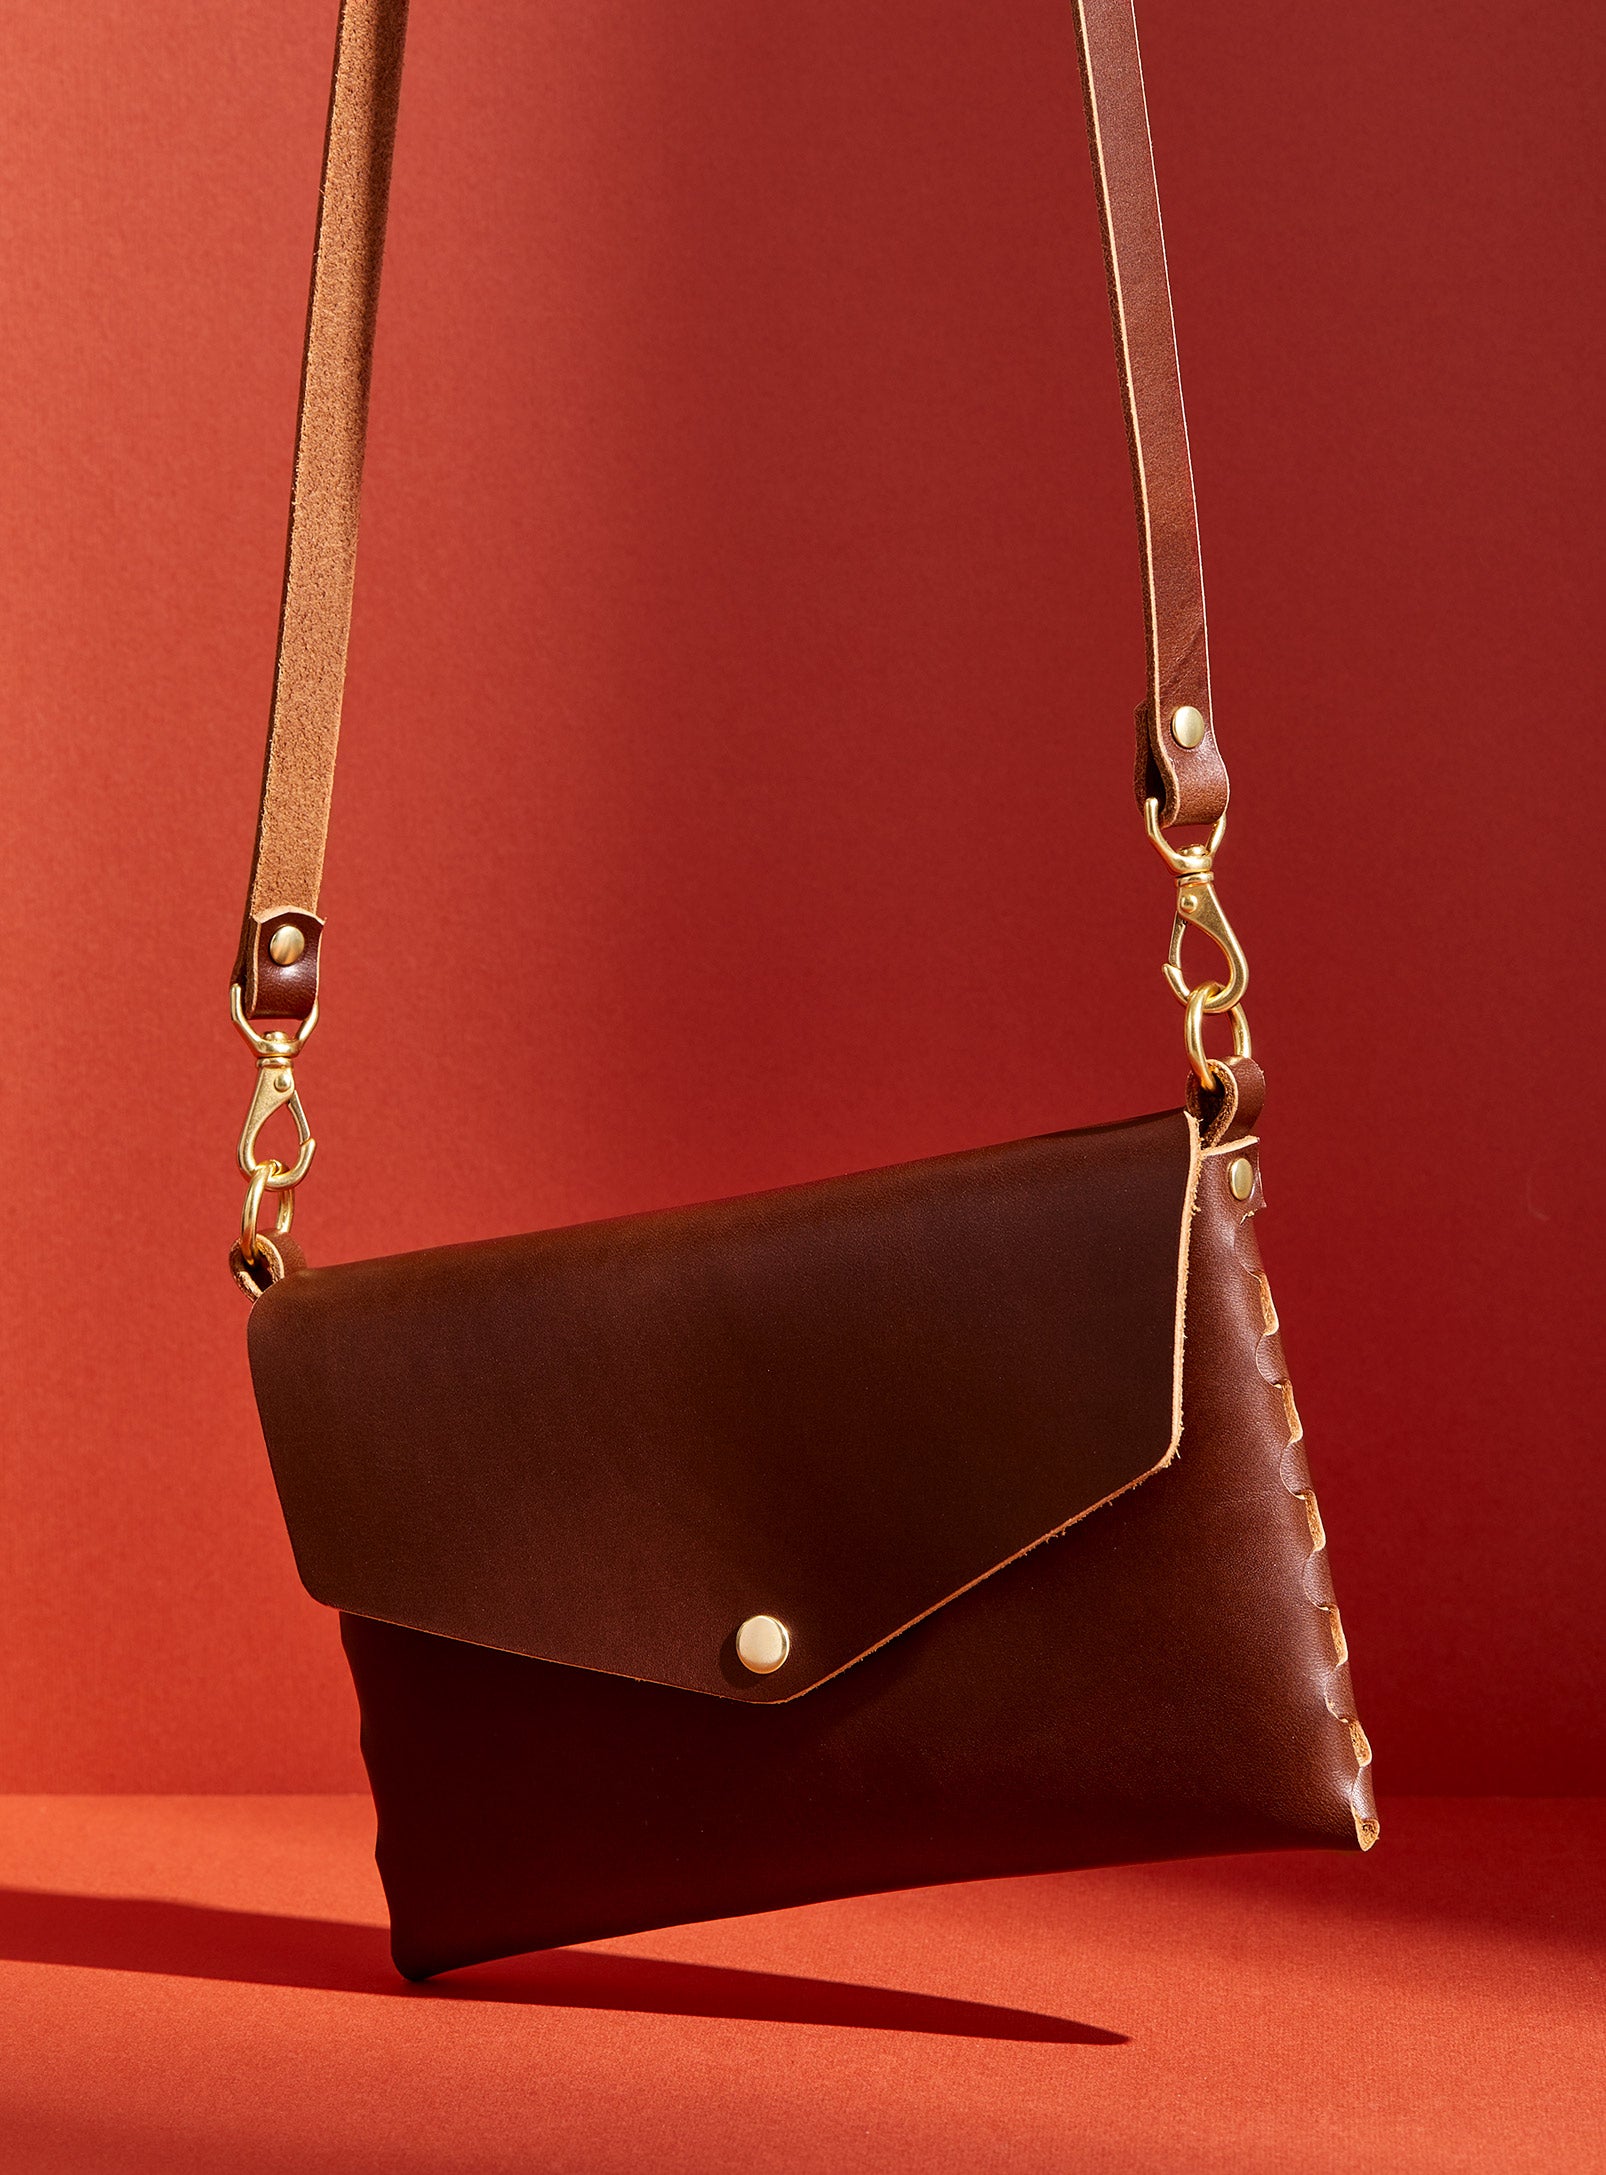 modjūl's mini leather bag in brown. A rectangular-shaped bag with long straps, handmade in Canada using quality Italian leather and brass hardware.